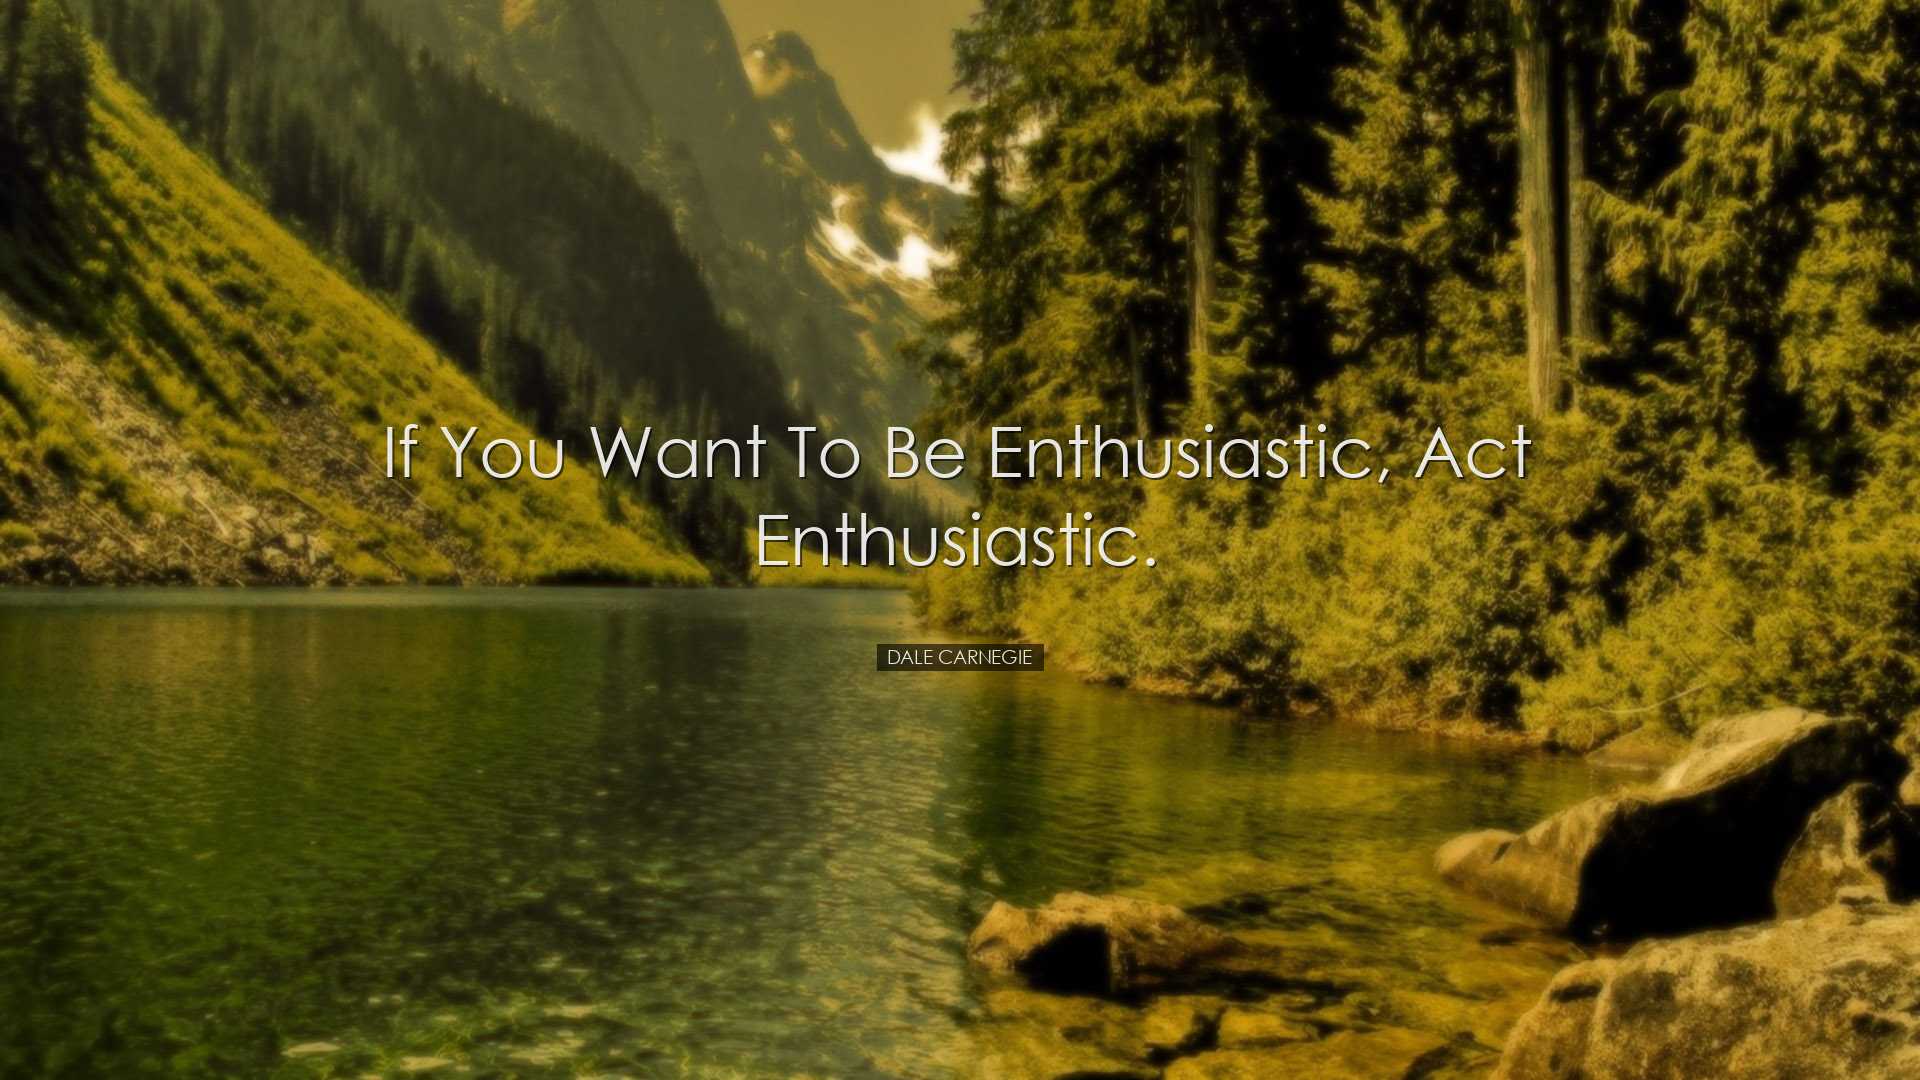 If you want to be enthusiastic, act enthusiastic. - Dale Carnegie